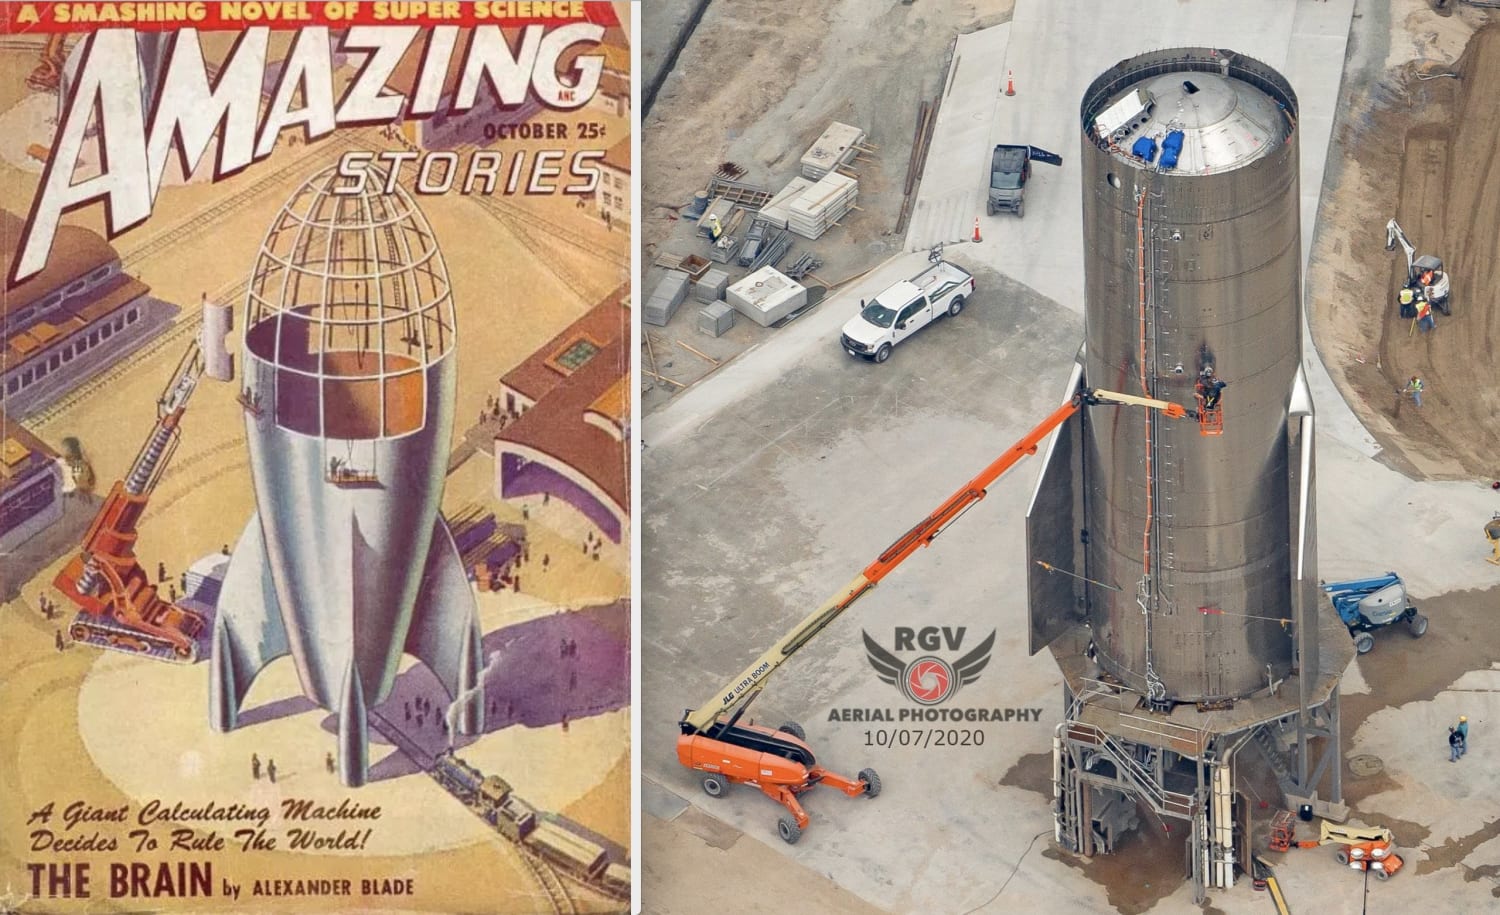 A 1948 novel cover by James B. Settles vs. a SpaceX Starship rocket under construction now